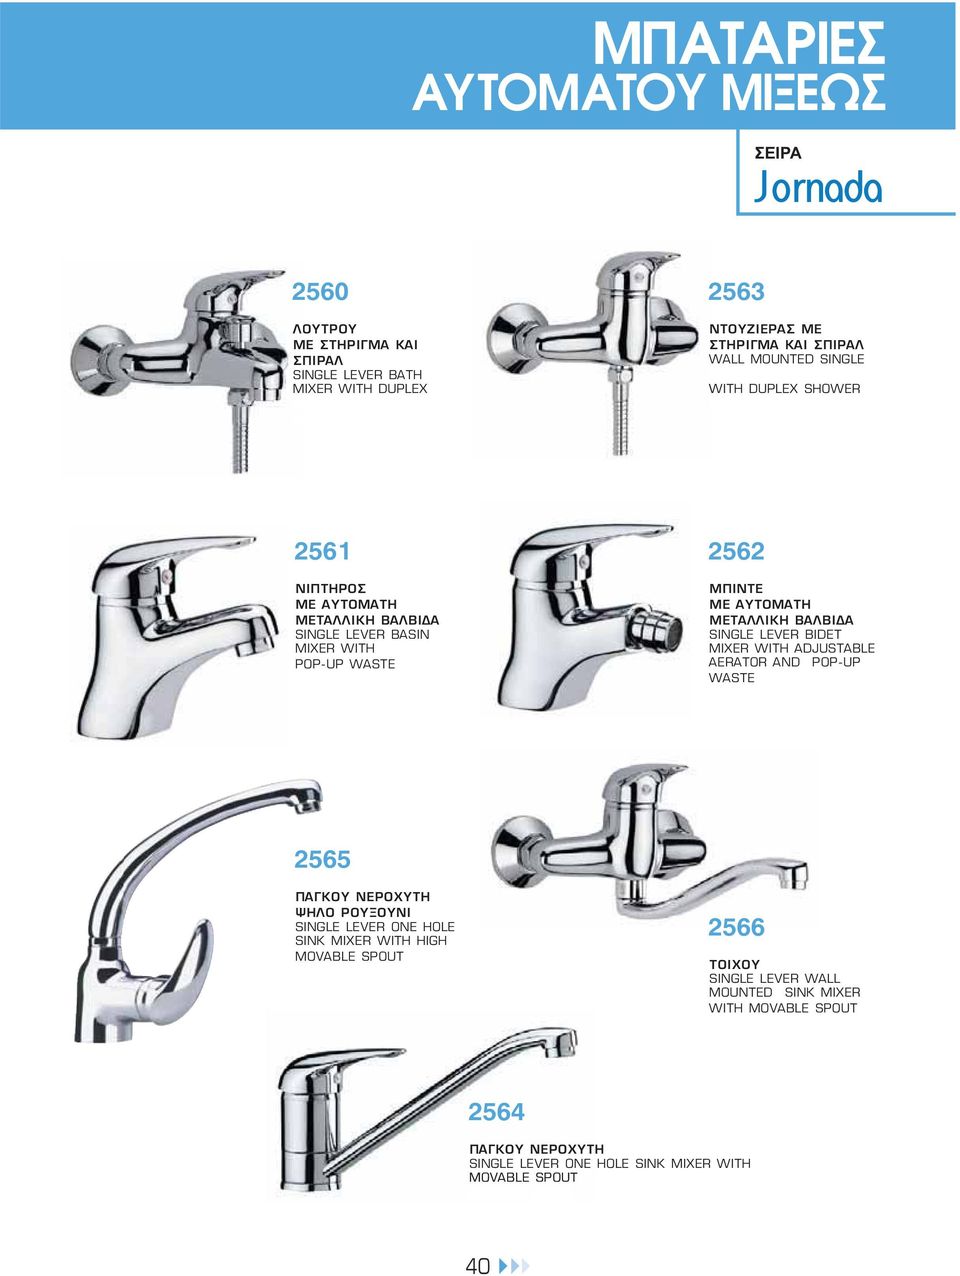 SINGLE LEVER BIDET MIXER WITH ADJUSTABLE AERATOR AND POP-UP 2565 ΨΗΛΟ ΡΟΥΞΟΥΝΙ SINGLE LEVER ONE HOLE SINK MIXER WITH HIGH